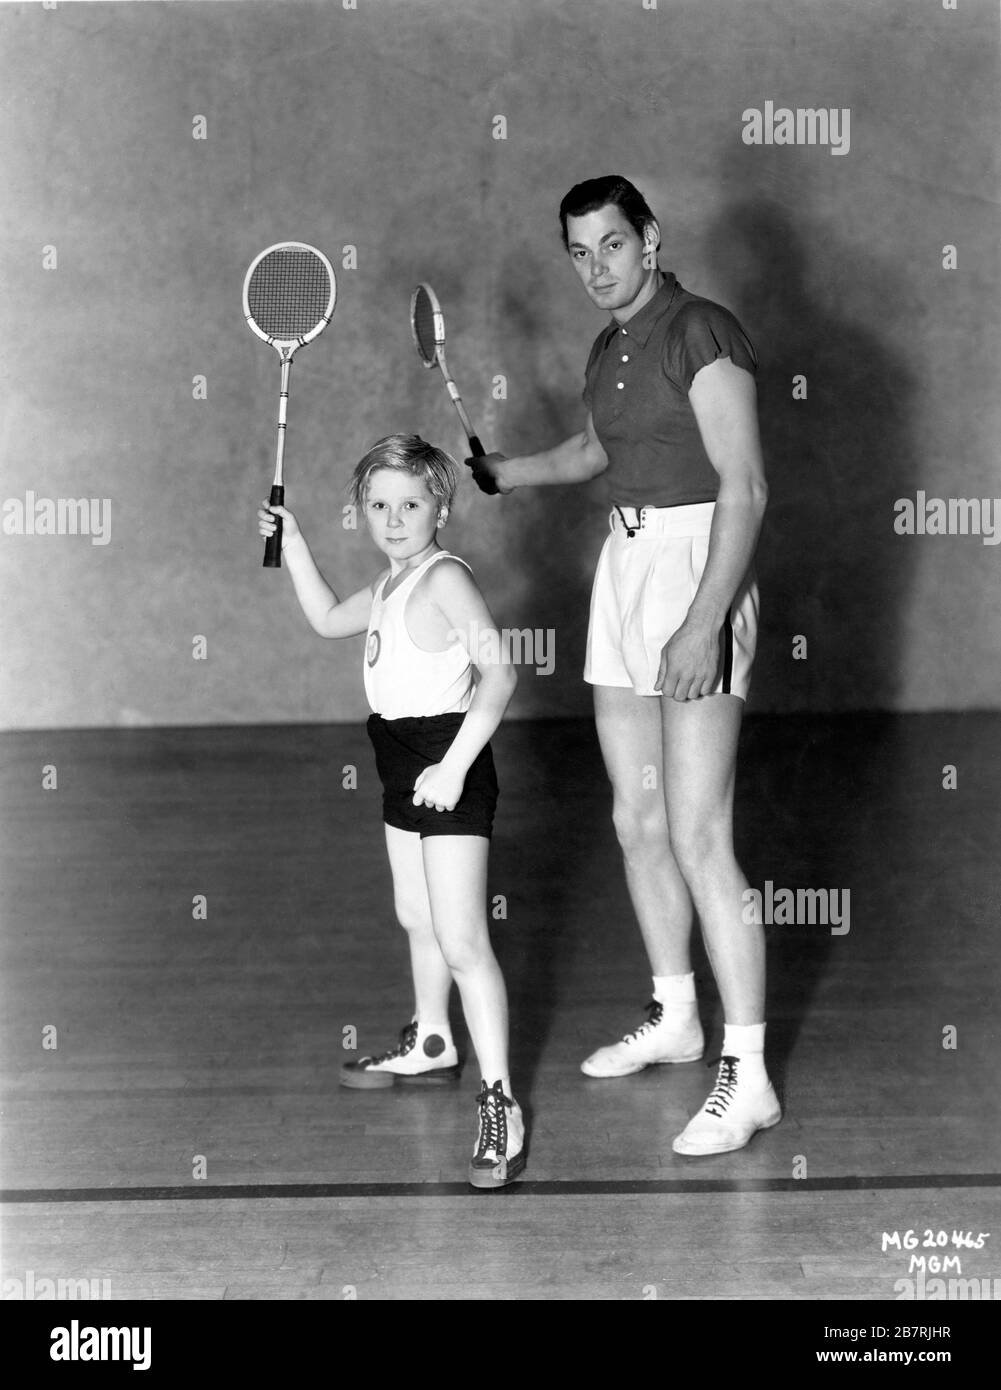 Child Star JACKIE COOPER and Tarzan actor JOHNNY WEISSMULLER 1932 Publicity  Pose with Badminton Racquets Metro Goldwyn Mayer Stock Photo - Alamy